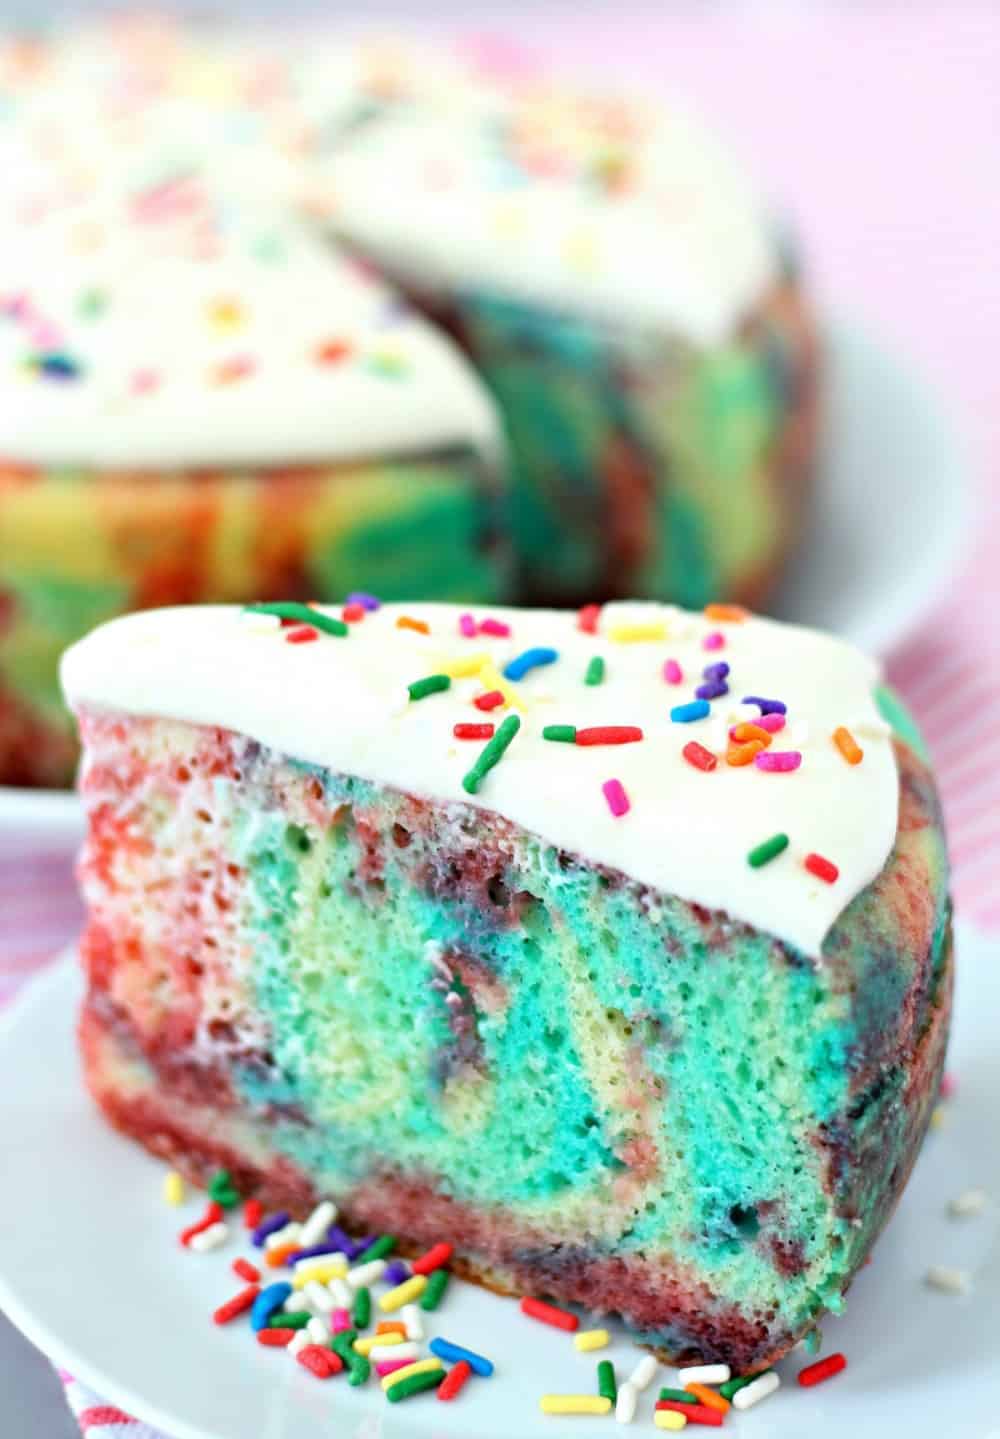 A slice of jello poke cake on a plate with sprinkles